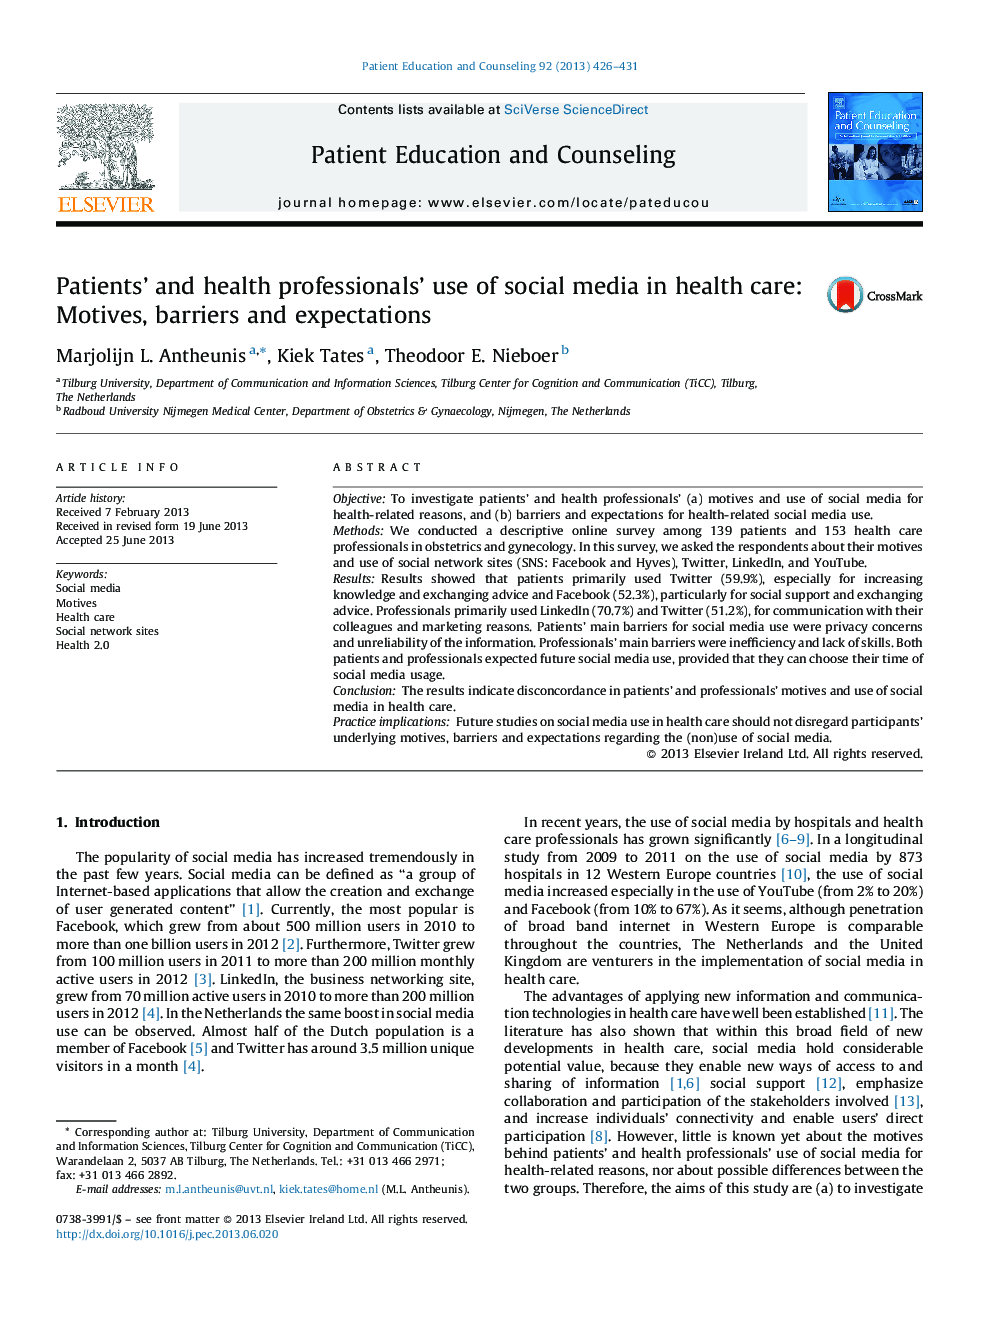 Patients’ and health professionals’ use of social media in health care: Motives, barriers and expectations